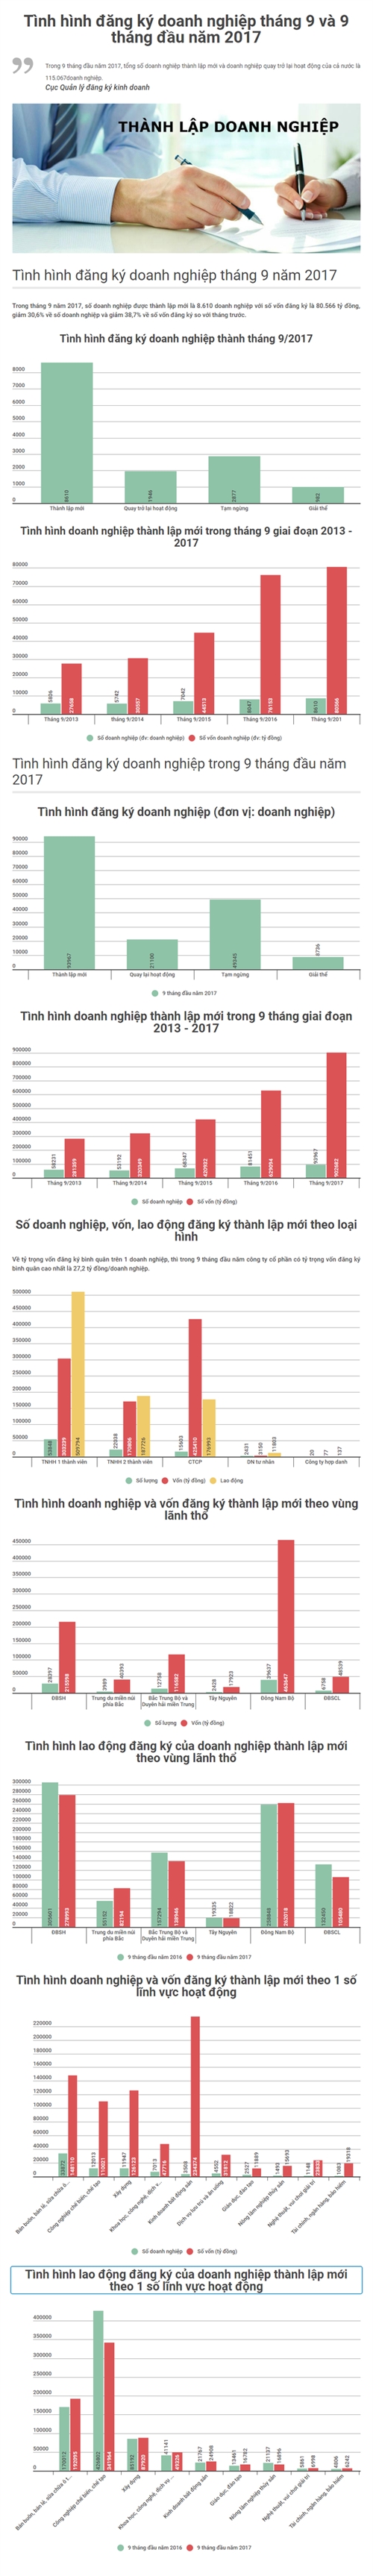 [Infographic] Toan canh buc tranh doanh nghiep thanh lap 9 thang